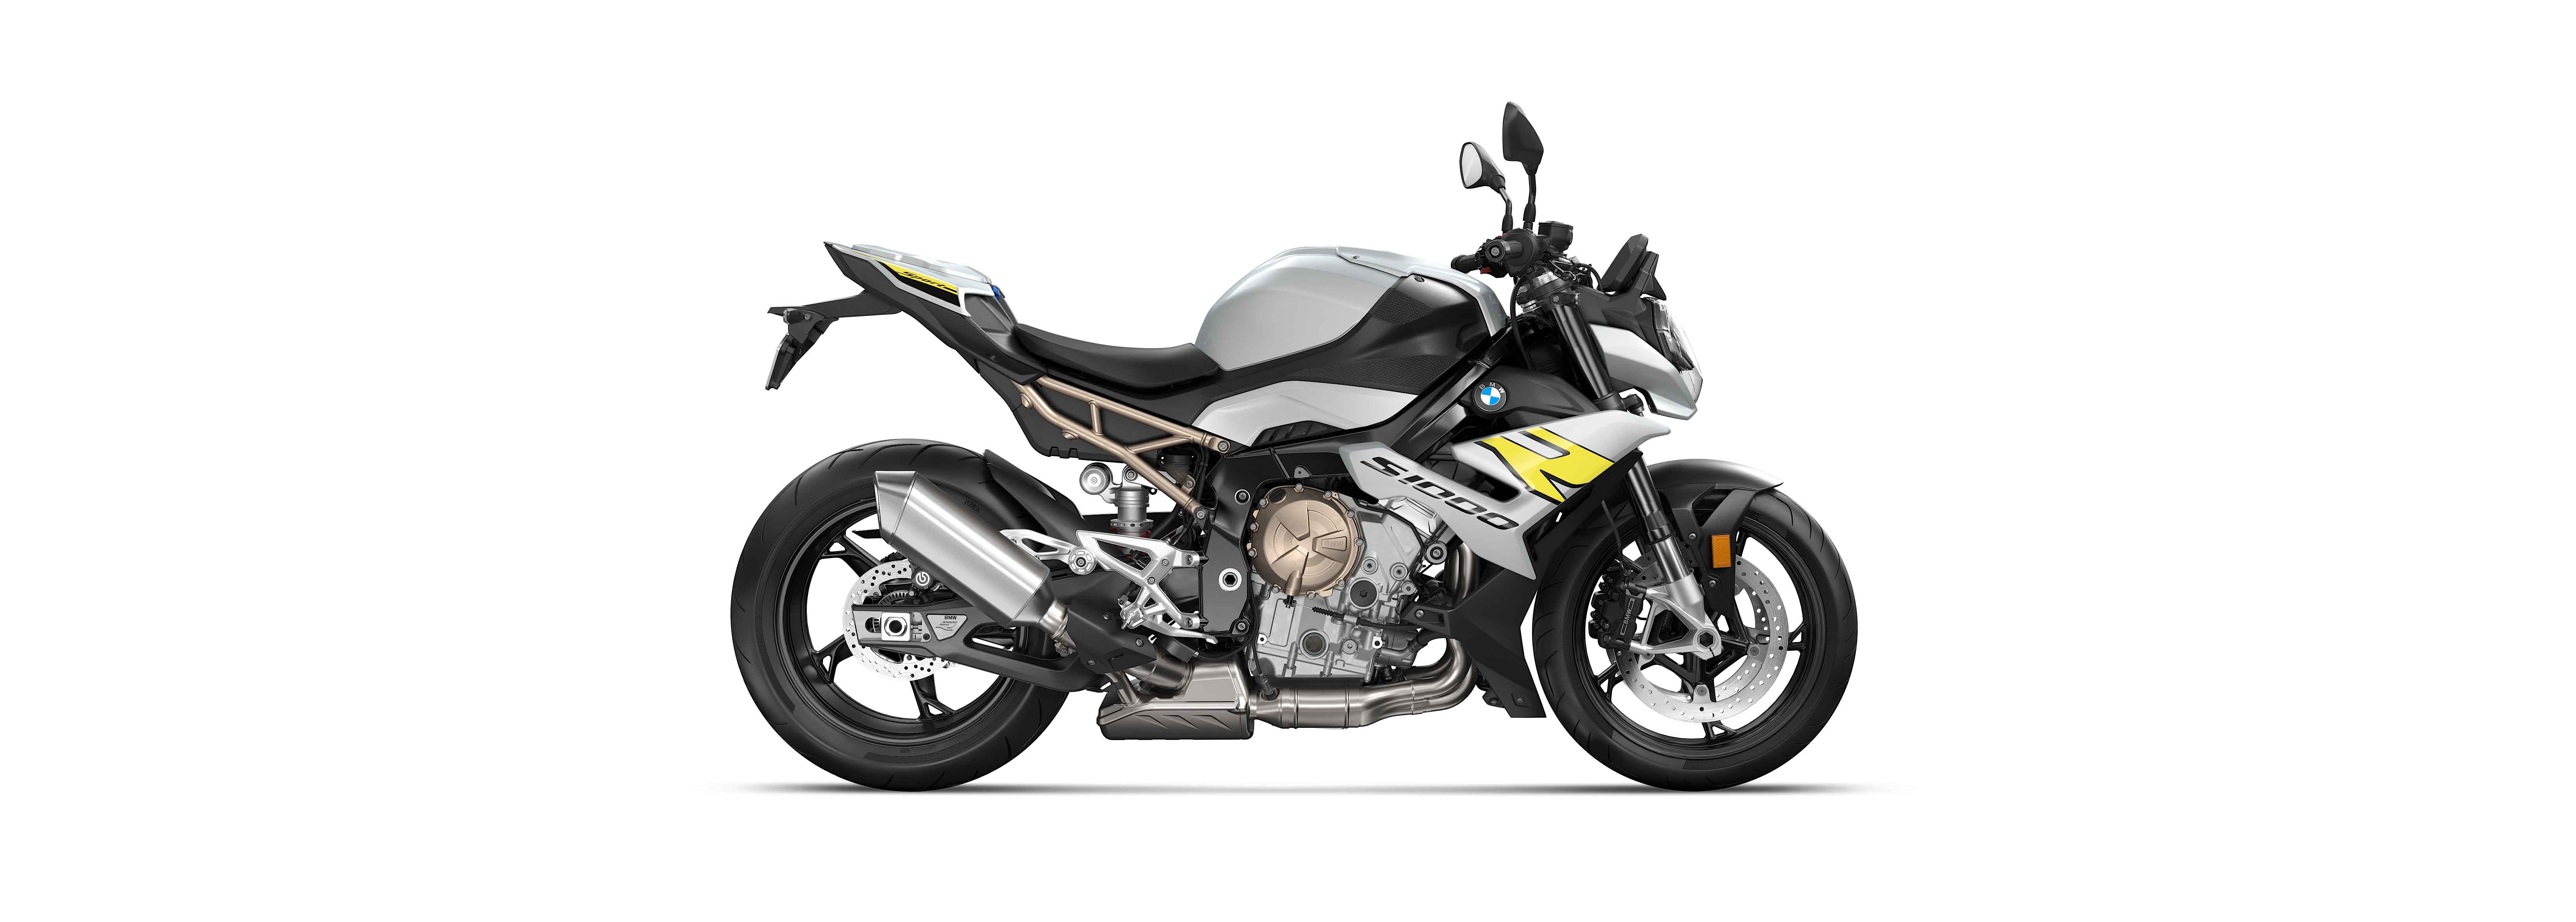 BMW S 1000 R first look